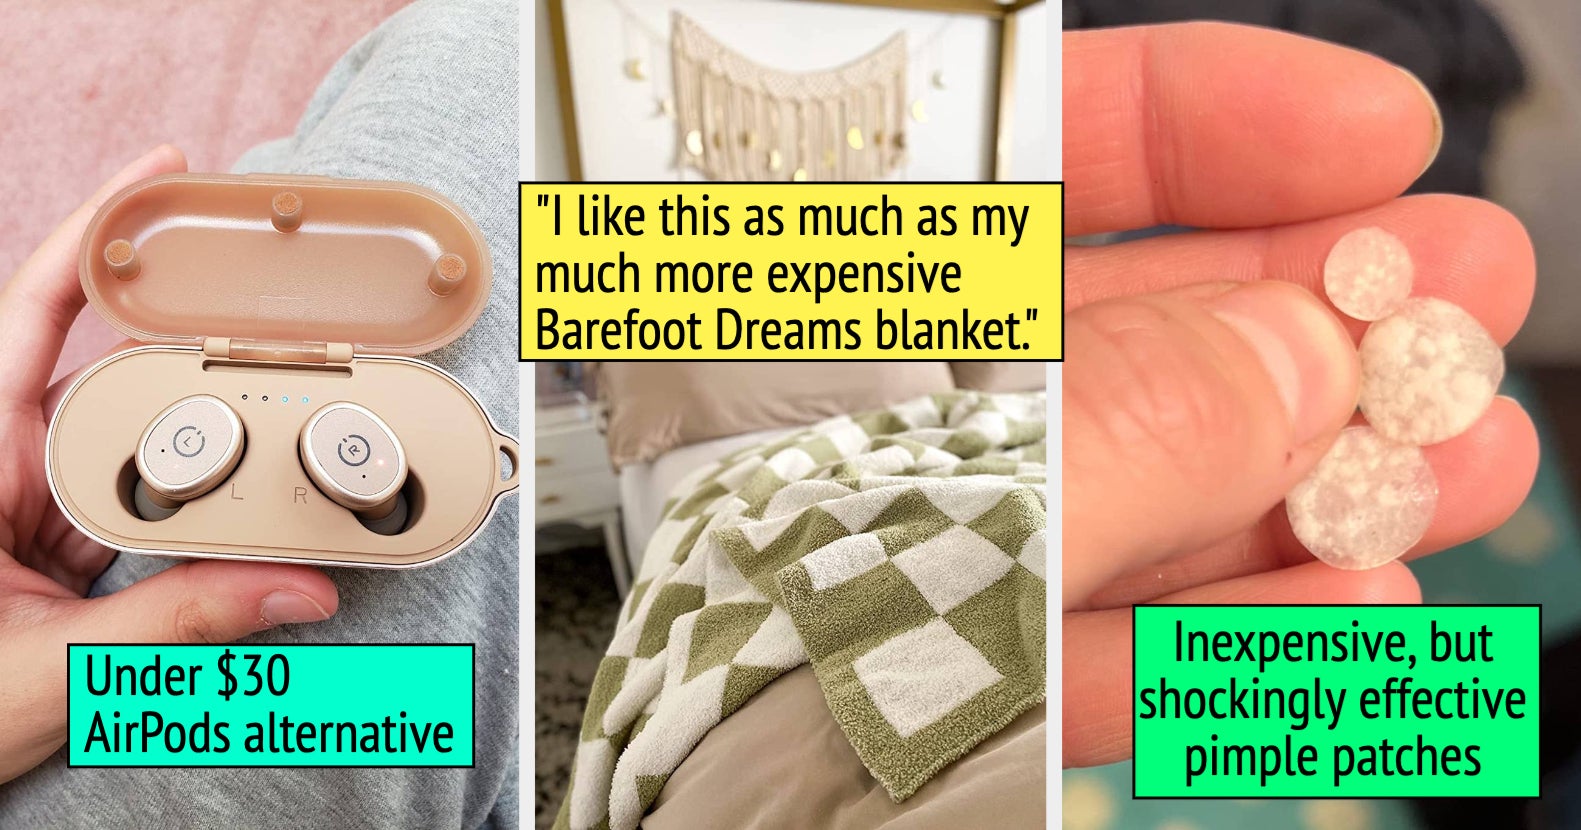 51 Cheap Alternatives To Expensive Products You'll Feel Like A Genius For  Buying